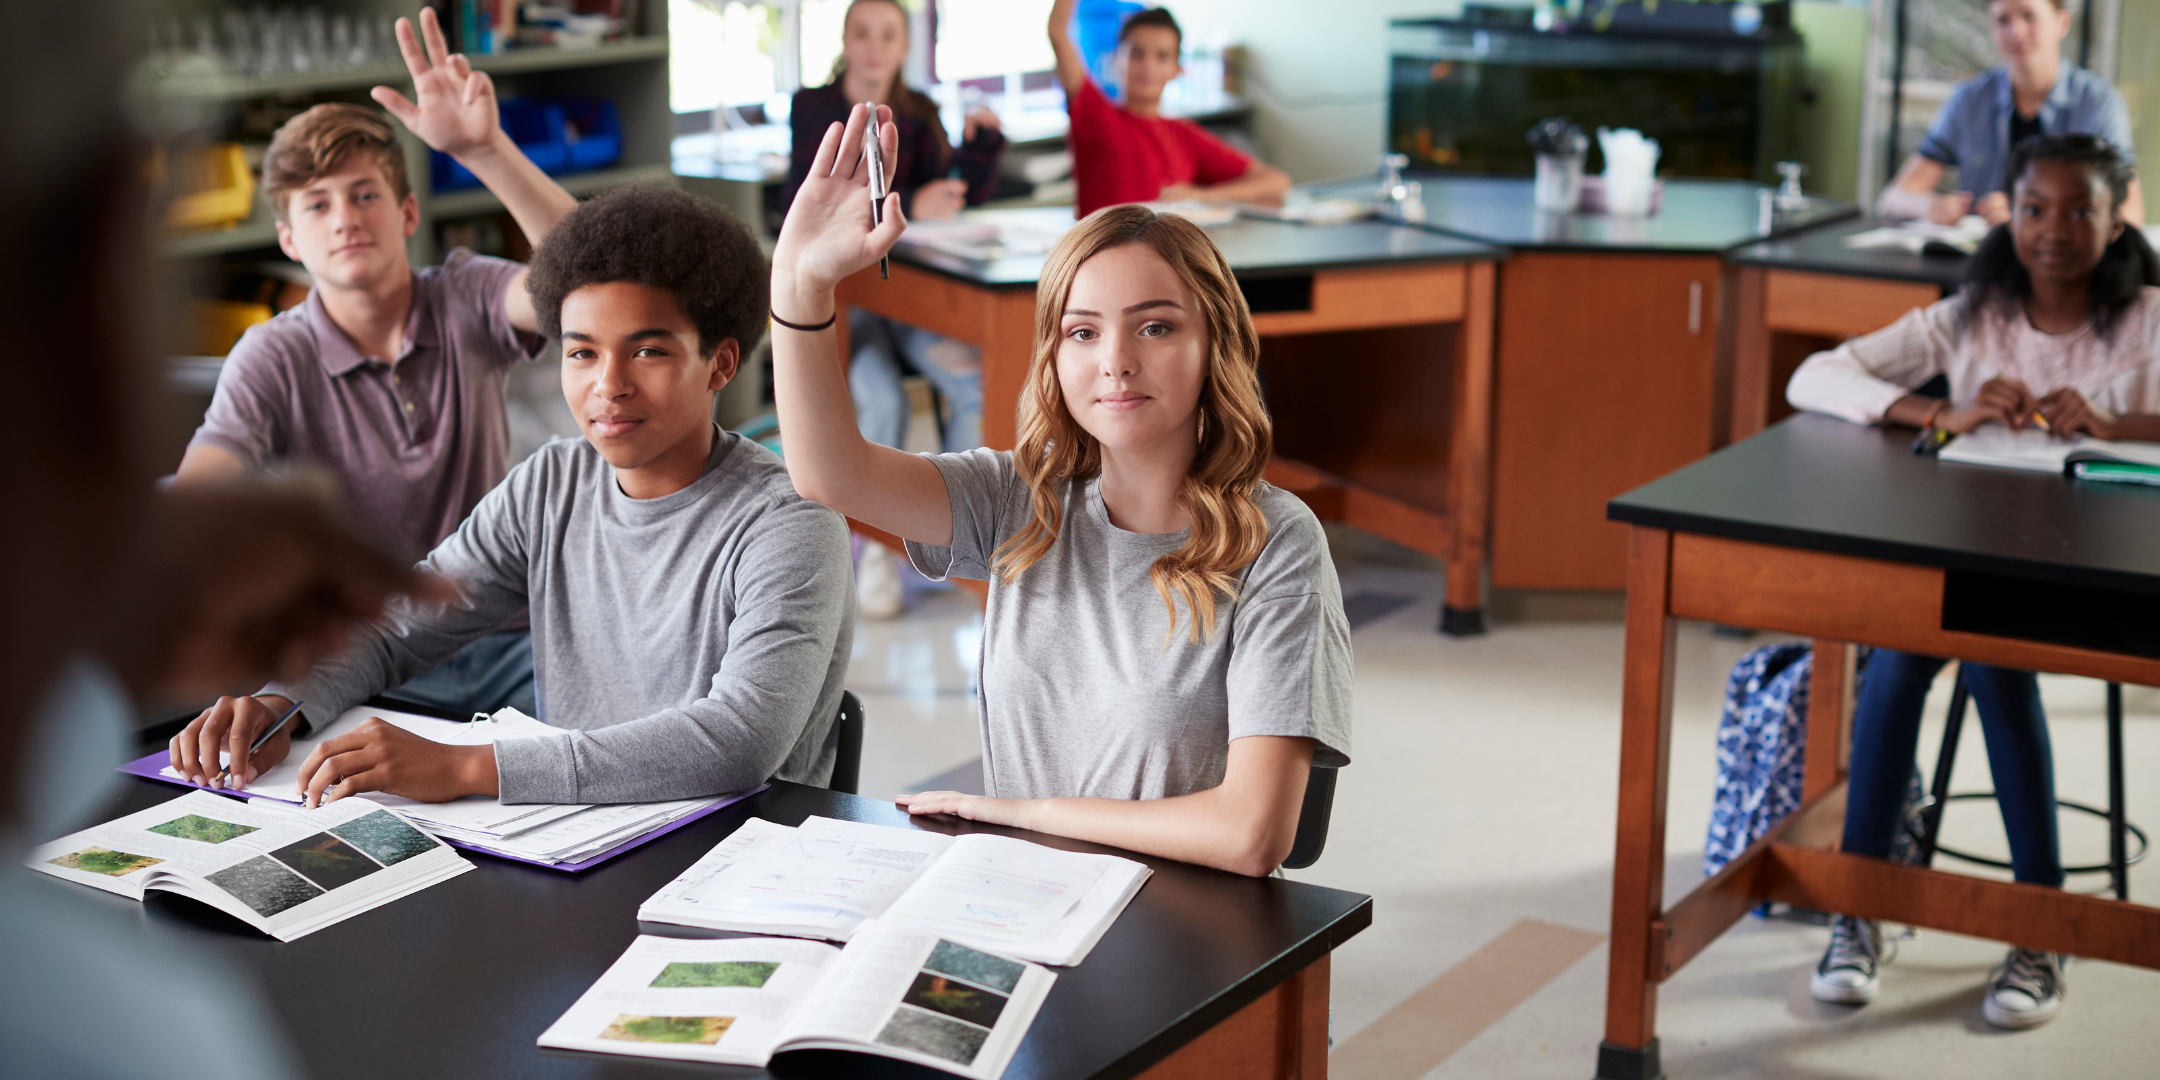 Female student in biology class raising hand to answer question